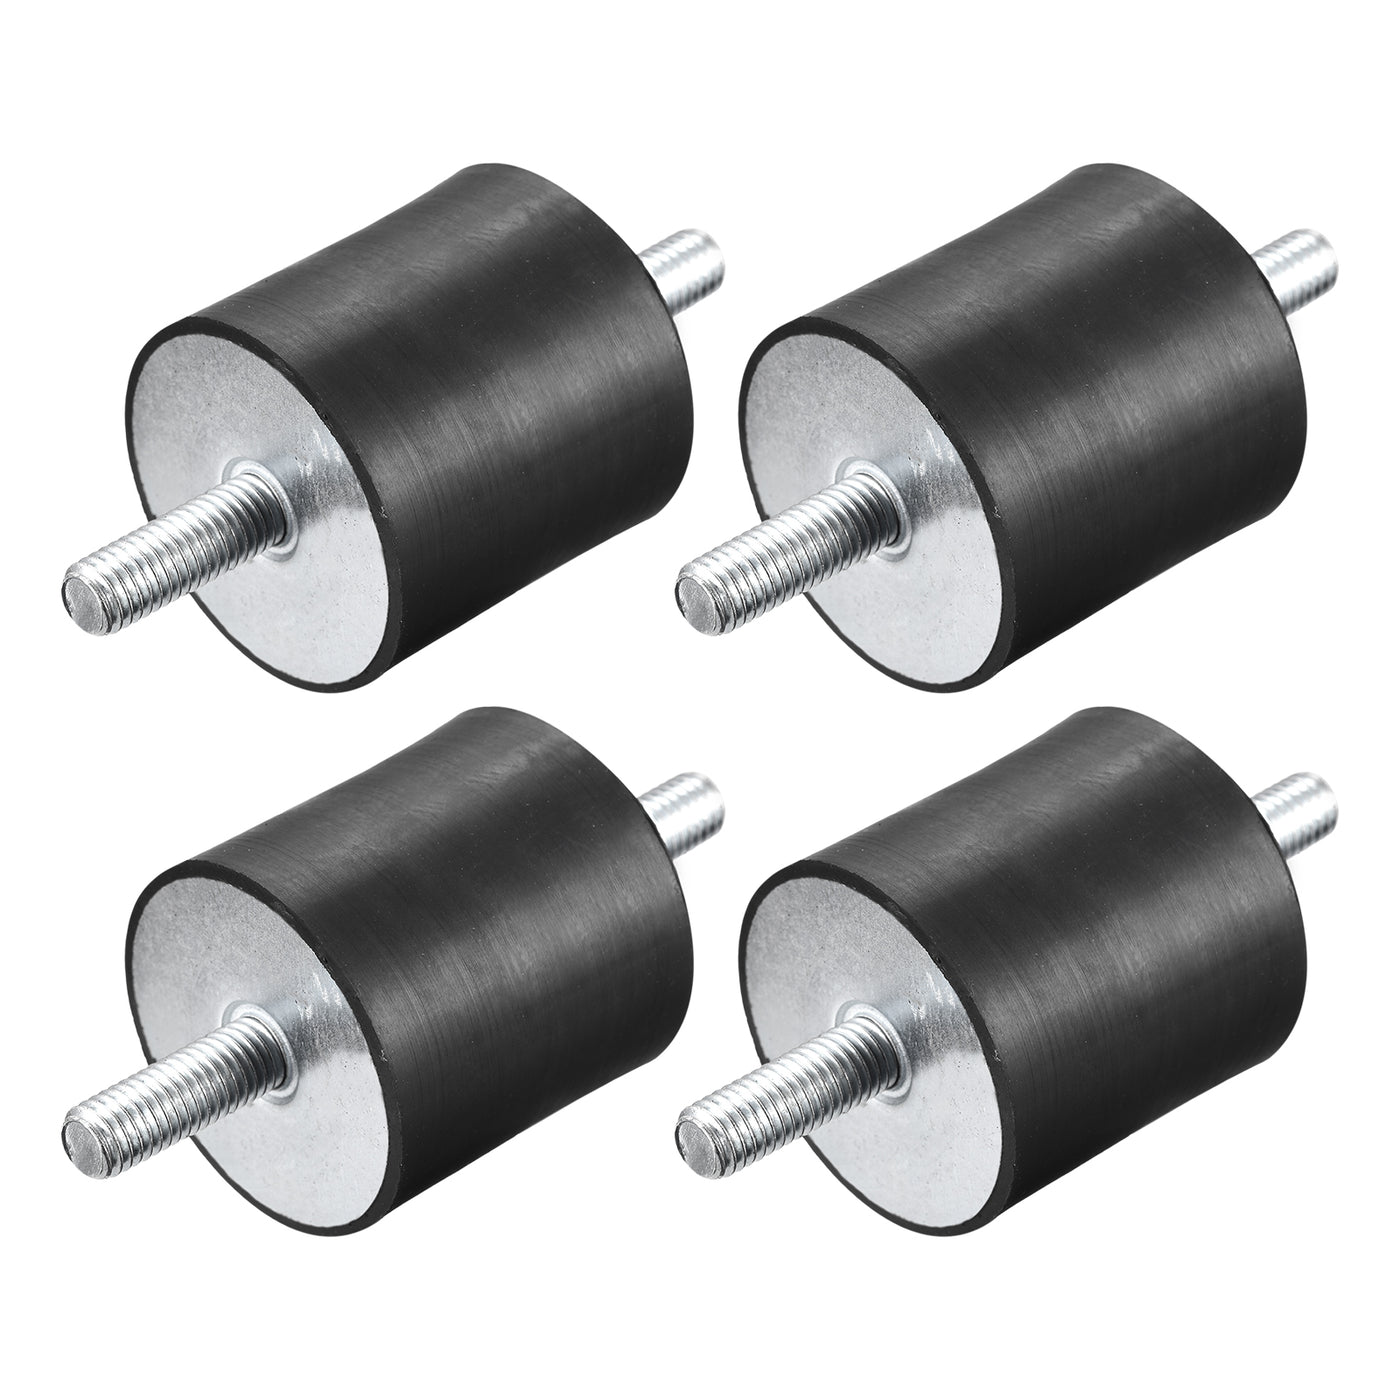 uxcell Uxcell Rubber Mounts 4pcs M10x28mm Male Vibration Isolator Shock Absorber D50mmxH50mm